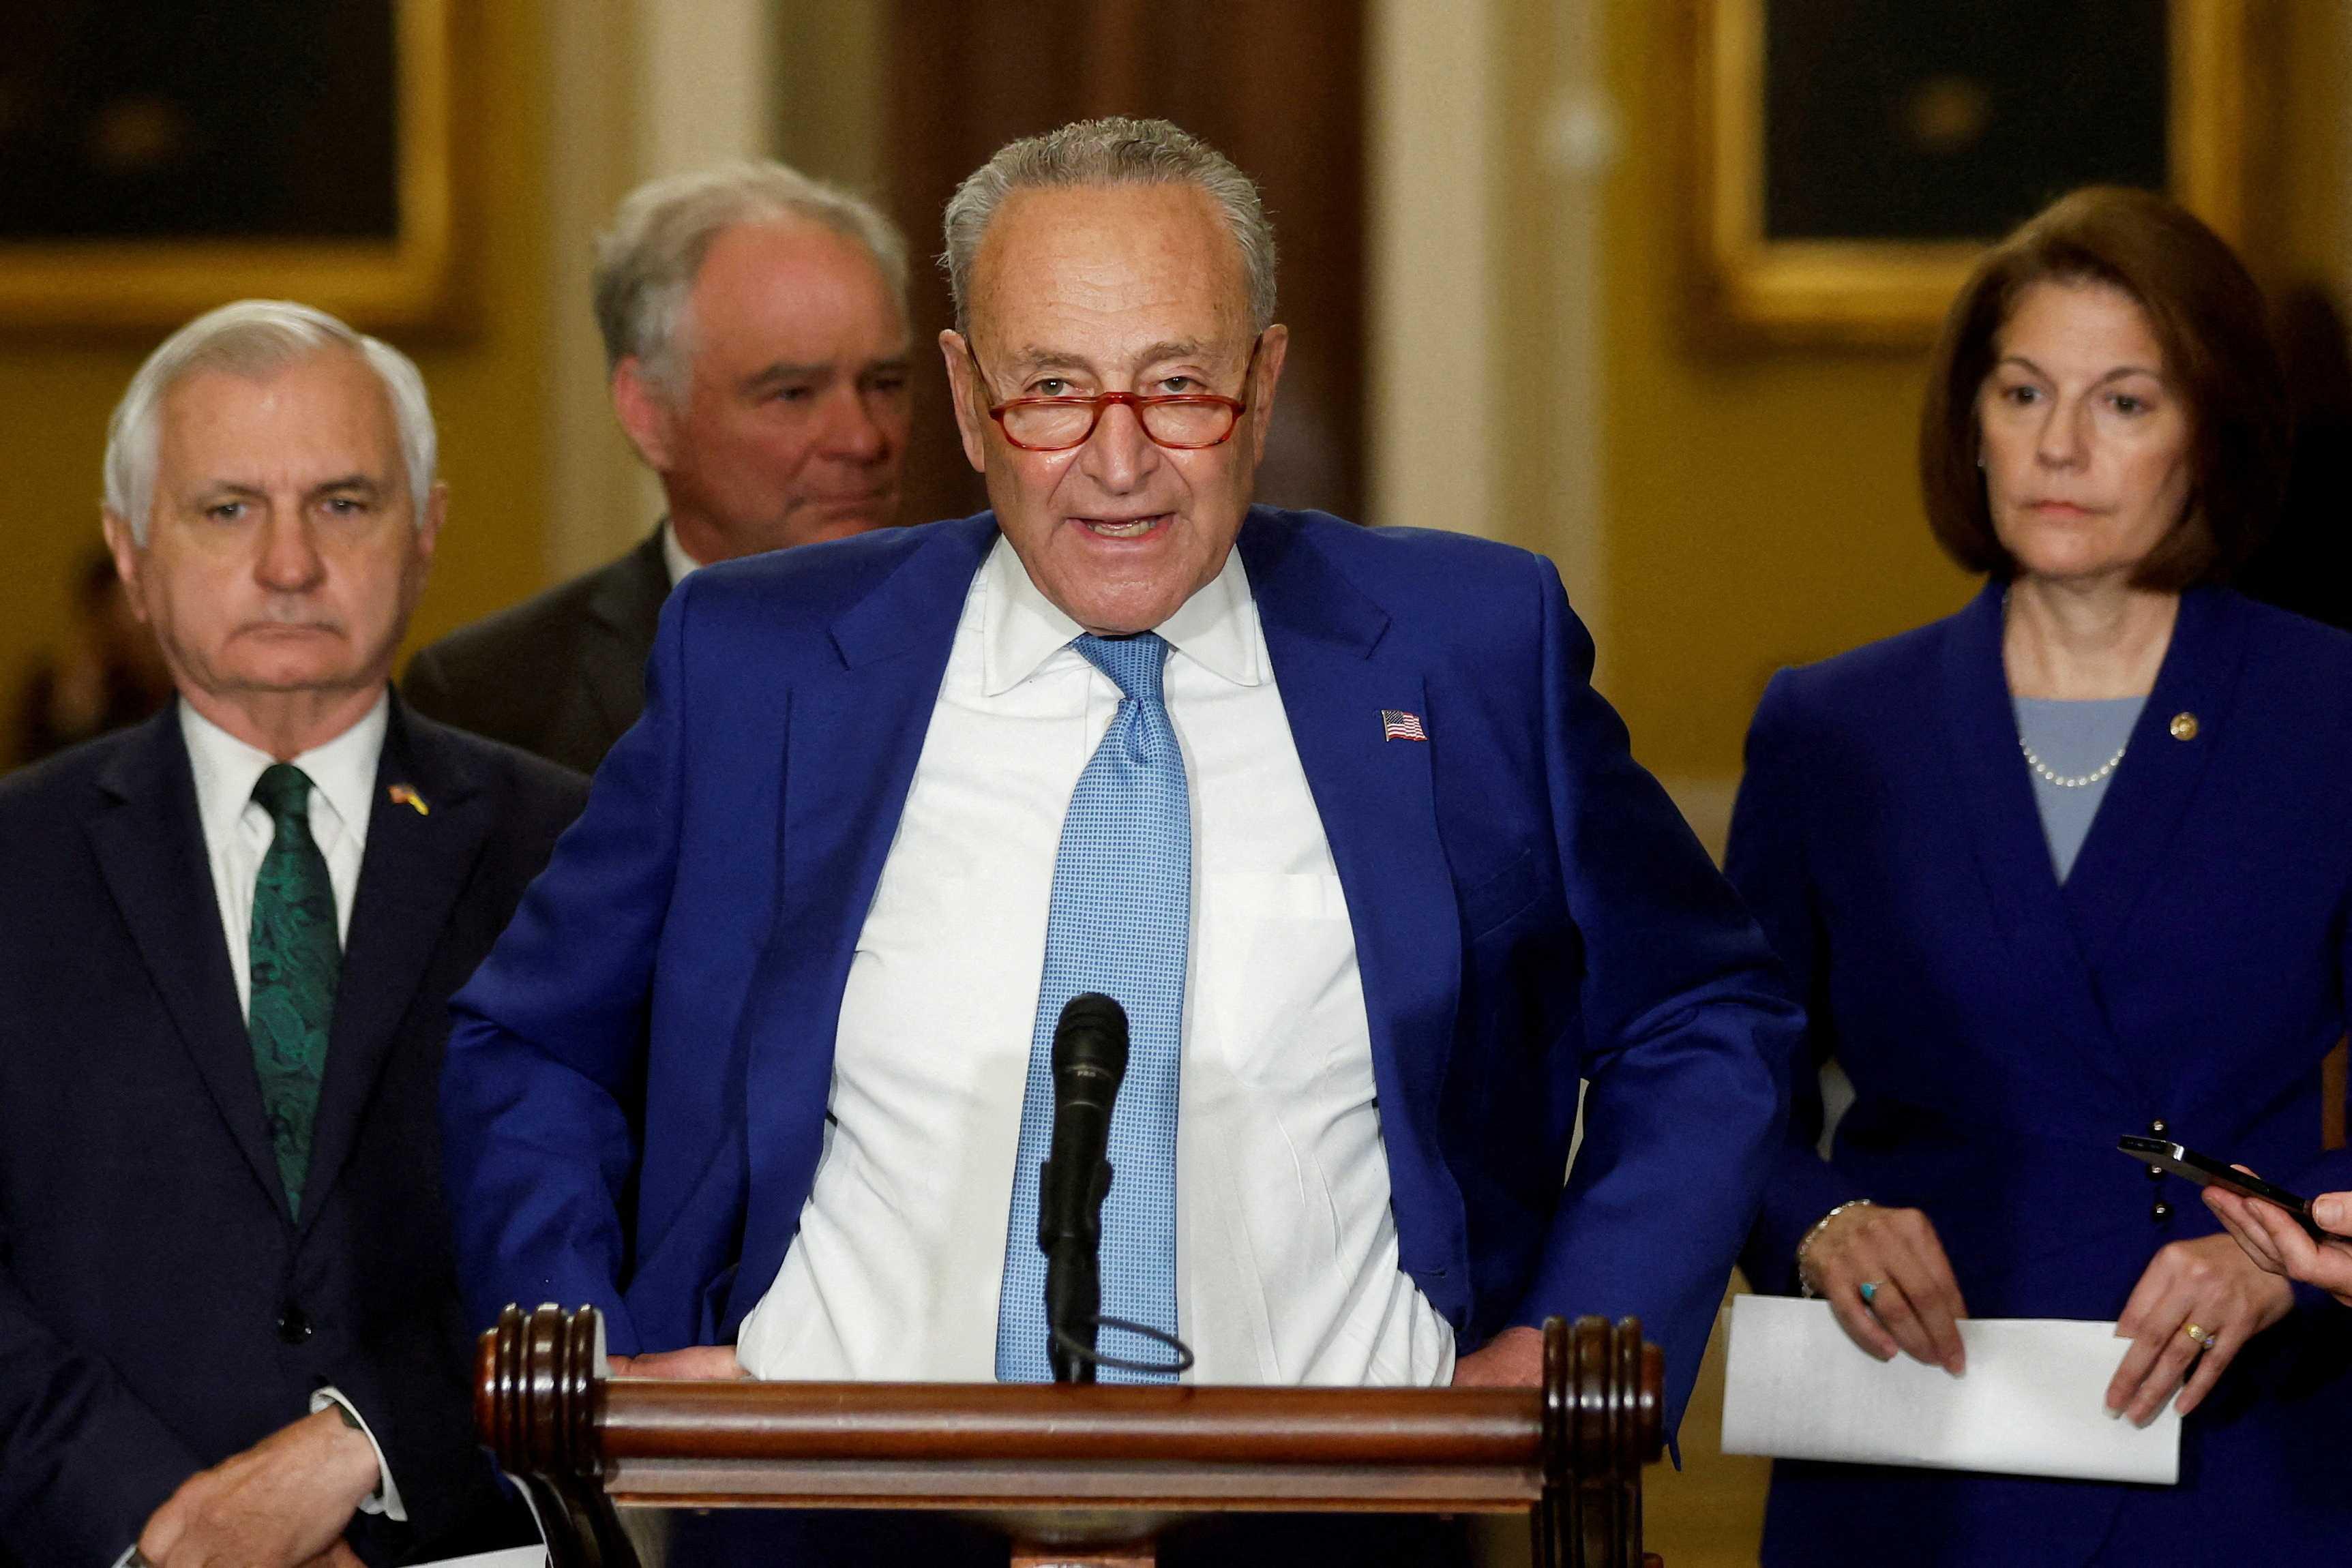 US Senate Majority Leader Chuck Schumer holds a press conference after the weekly Democratic caucus policy luncheon at the US Capitol in Washington, US July 19. Photo: Reuters